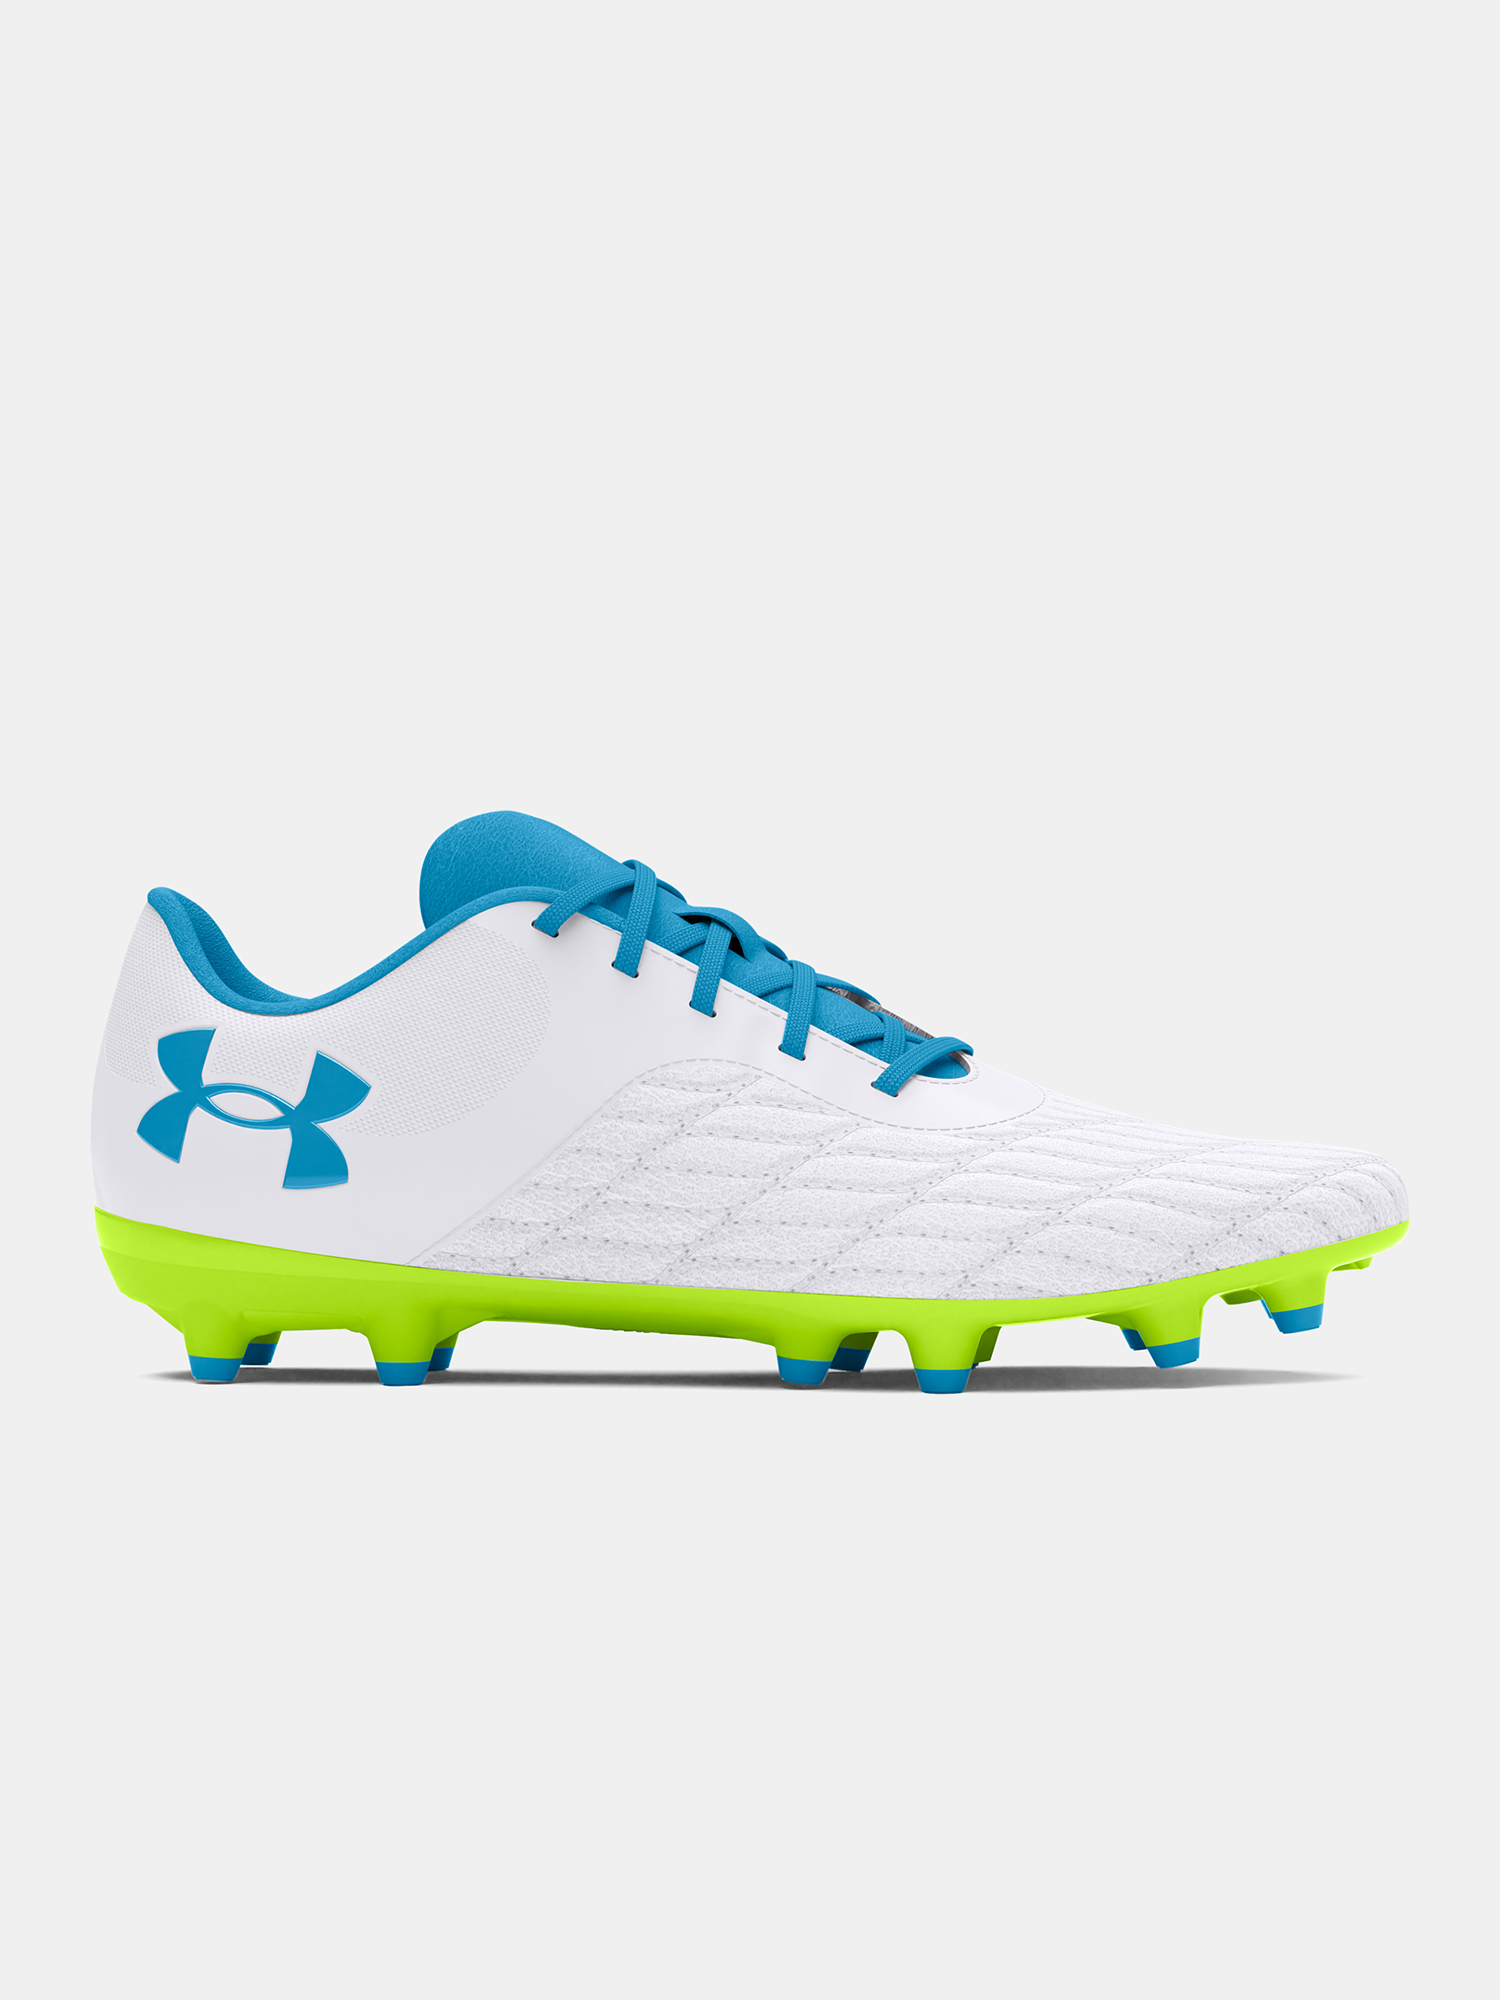 Under Armour UA Magnetico Select 3.0 FG-WHT Football Boots - unisex